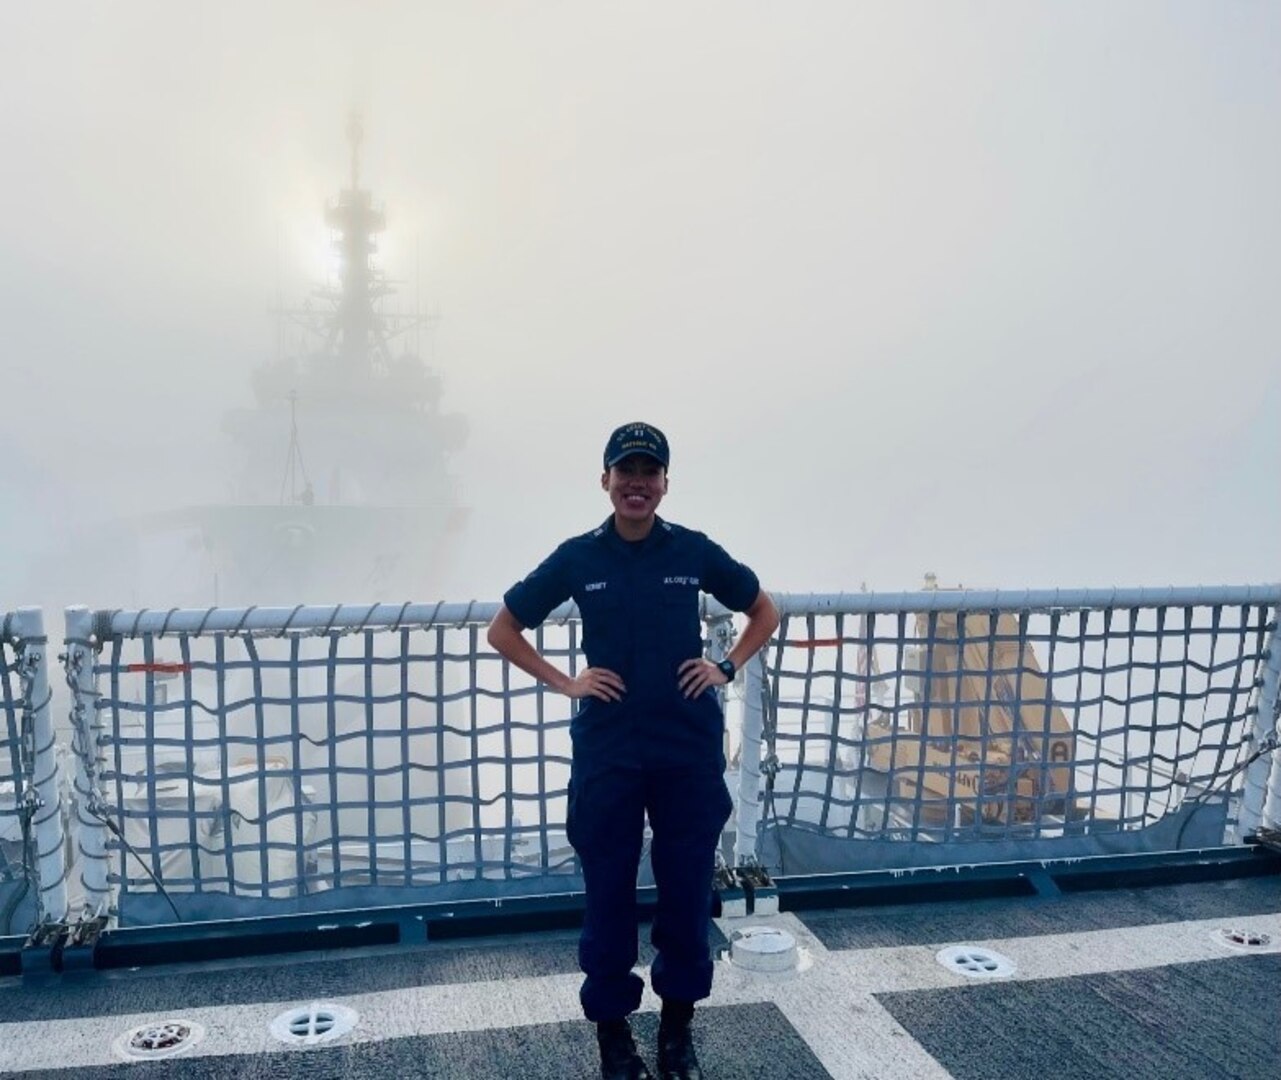 Lt. Jalle Merritt, a combat systems officer assigned to the Coast Guard Cutter Waesche, photographed with a national security cutter in the background. Merritt is slated to command the Coast Guard Cutter Myrtle Hazard in July 2022